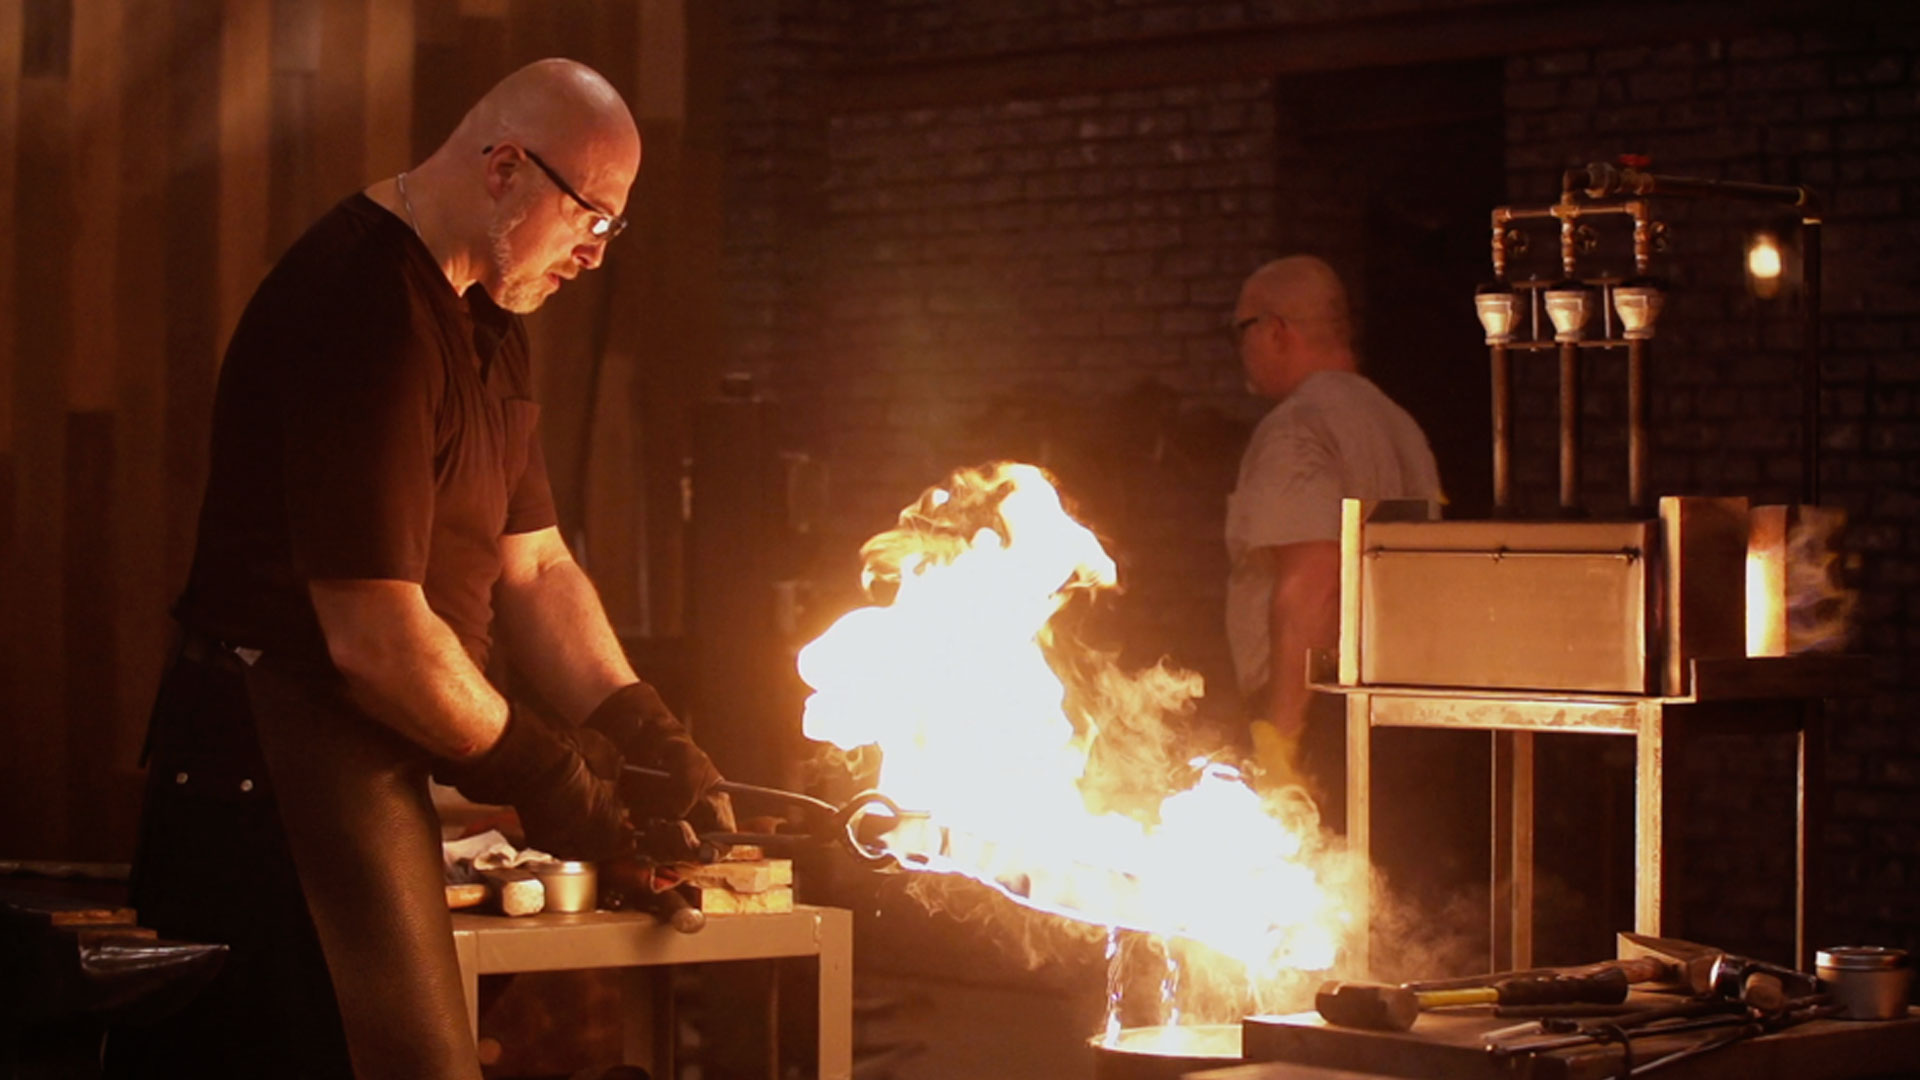 forged in fire season 6 episode 16